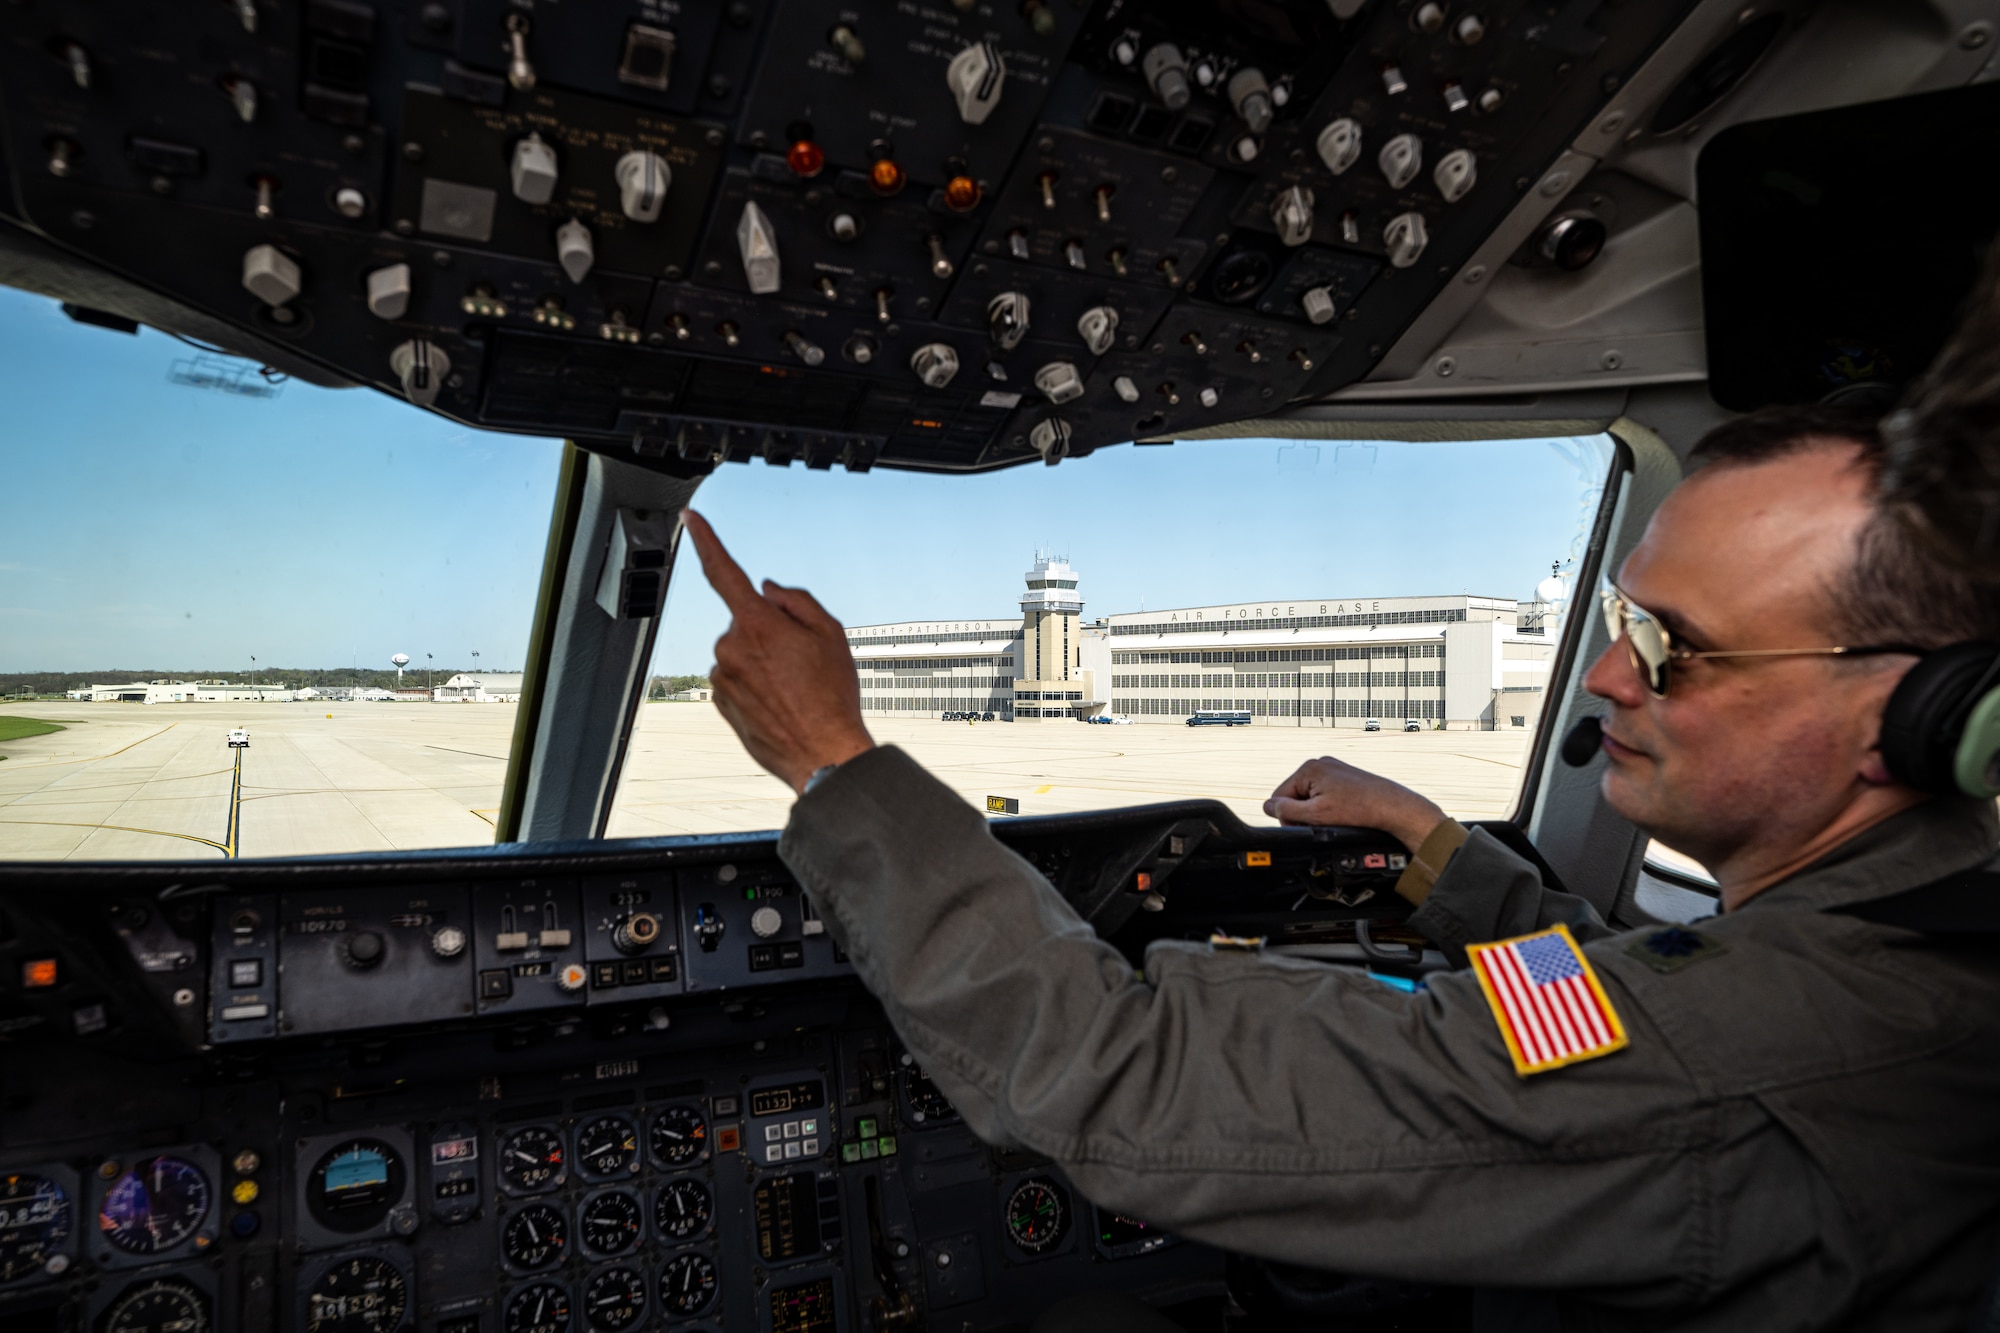 Pilot Lt Col Johnson reaches to press a button inside the cockpit with Wright-Patterson AFB hangars and tower in the background